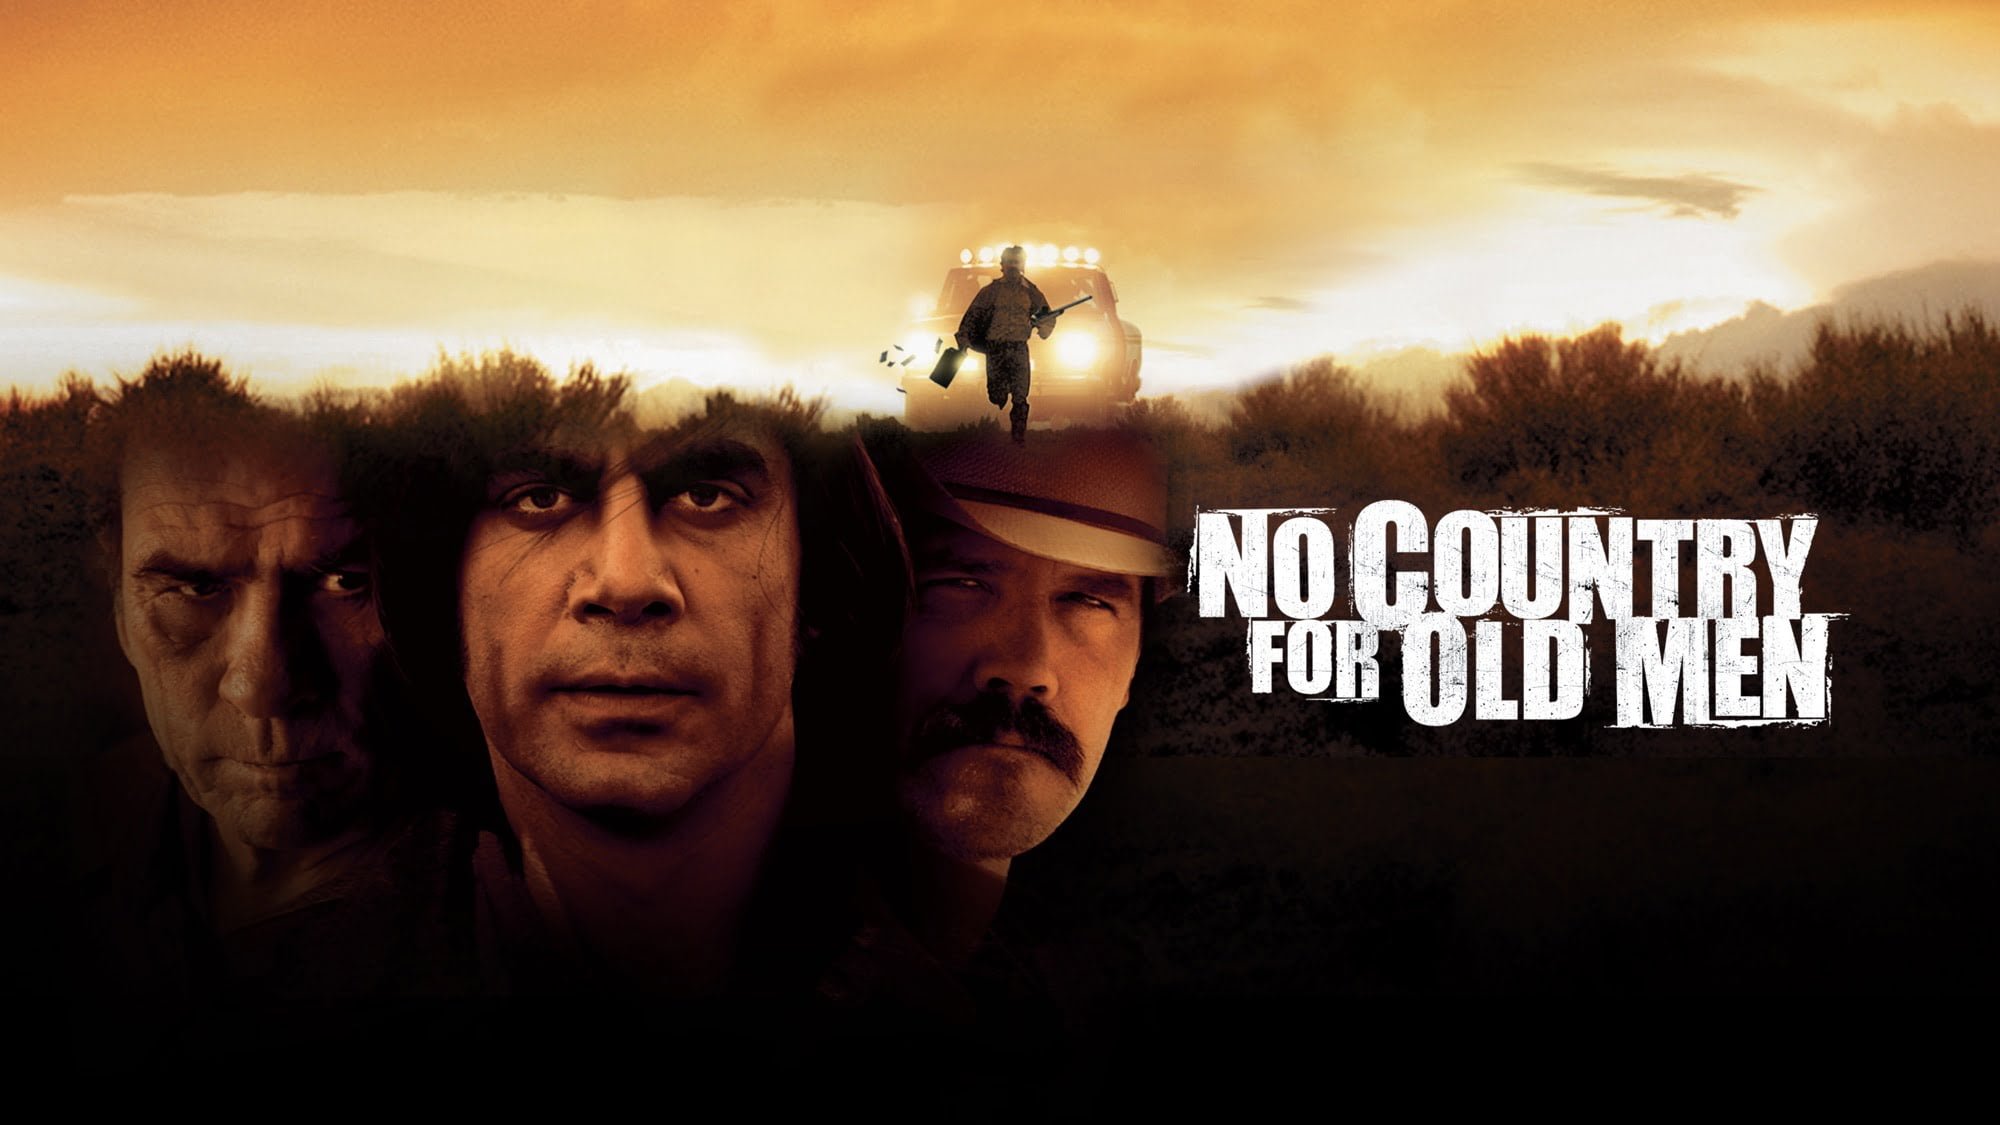 No Country for Old Men review – dark, violent, apocalyptic and